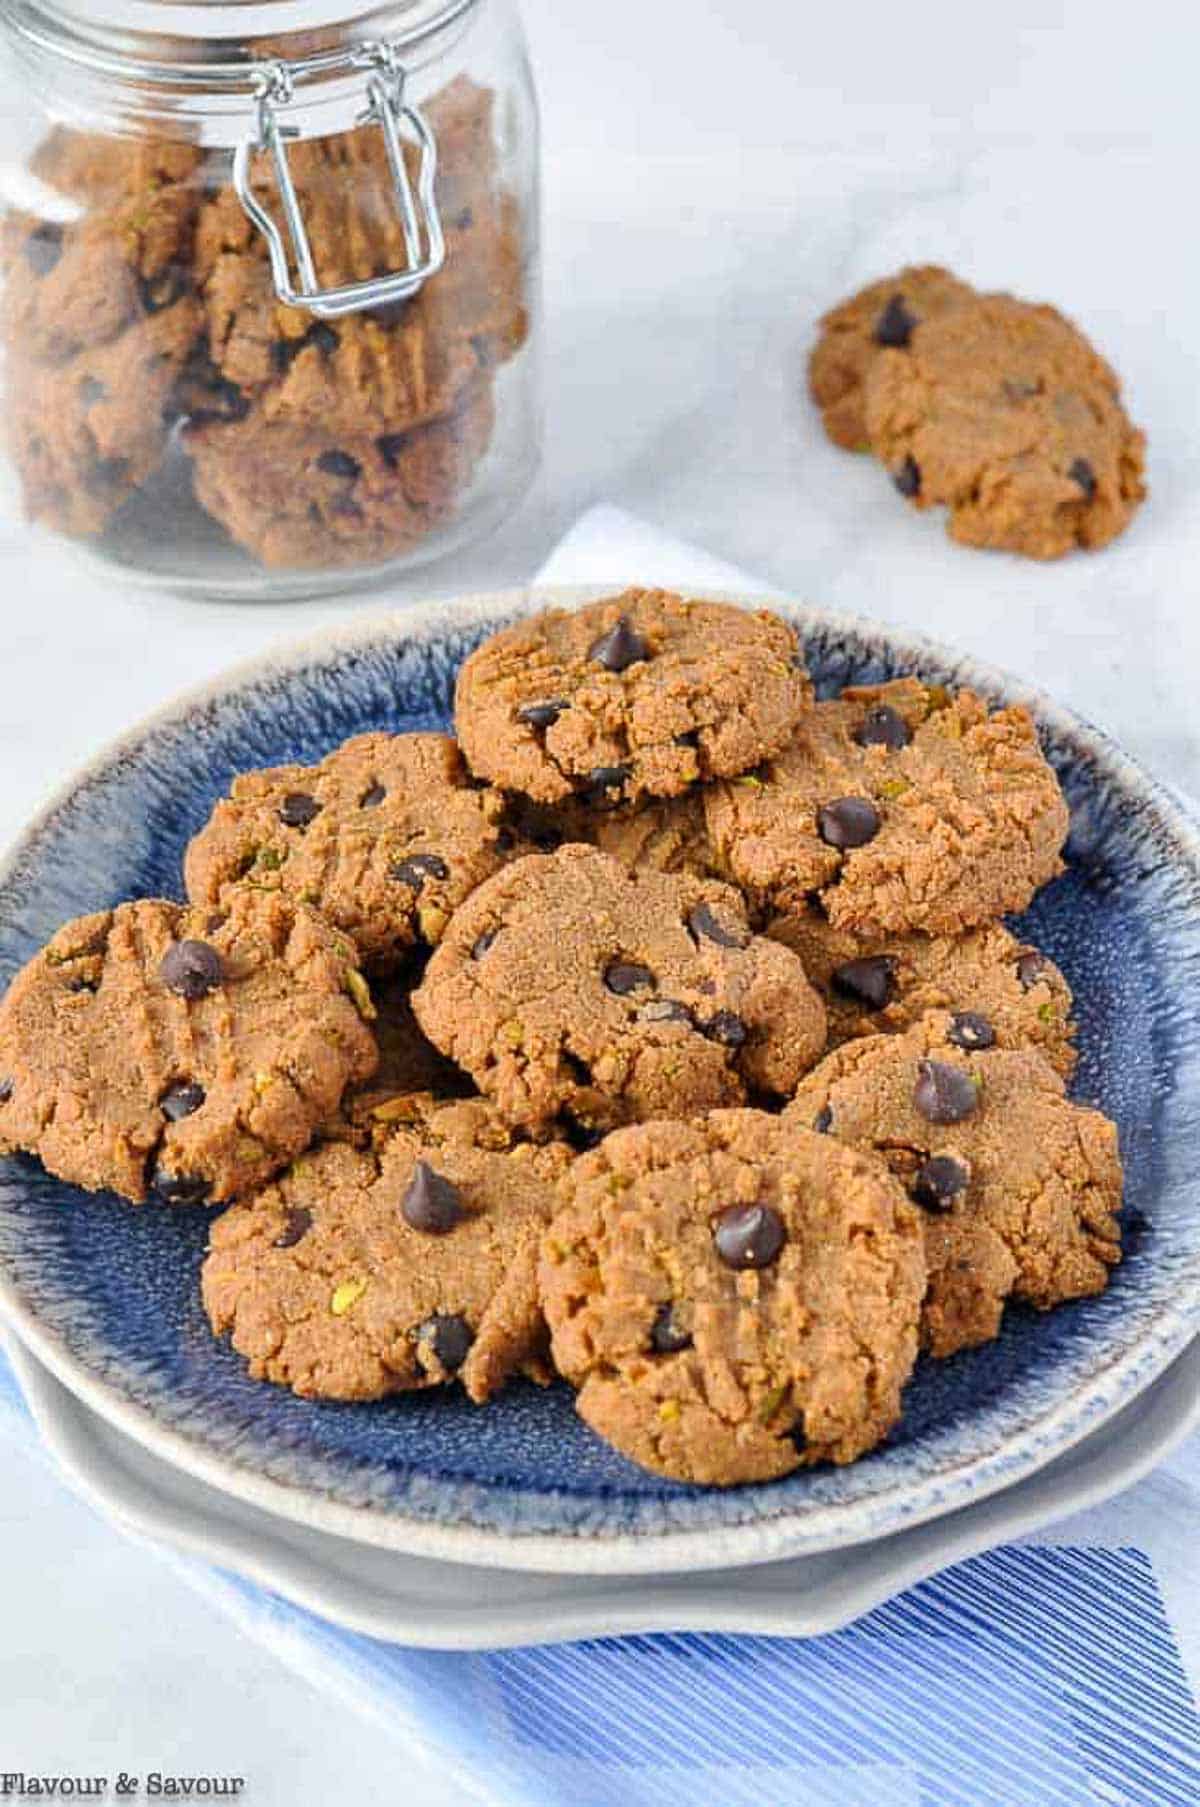 Sugar-free almond butter chocolate chip cookies on a plate.